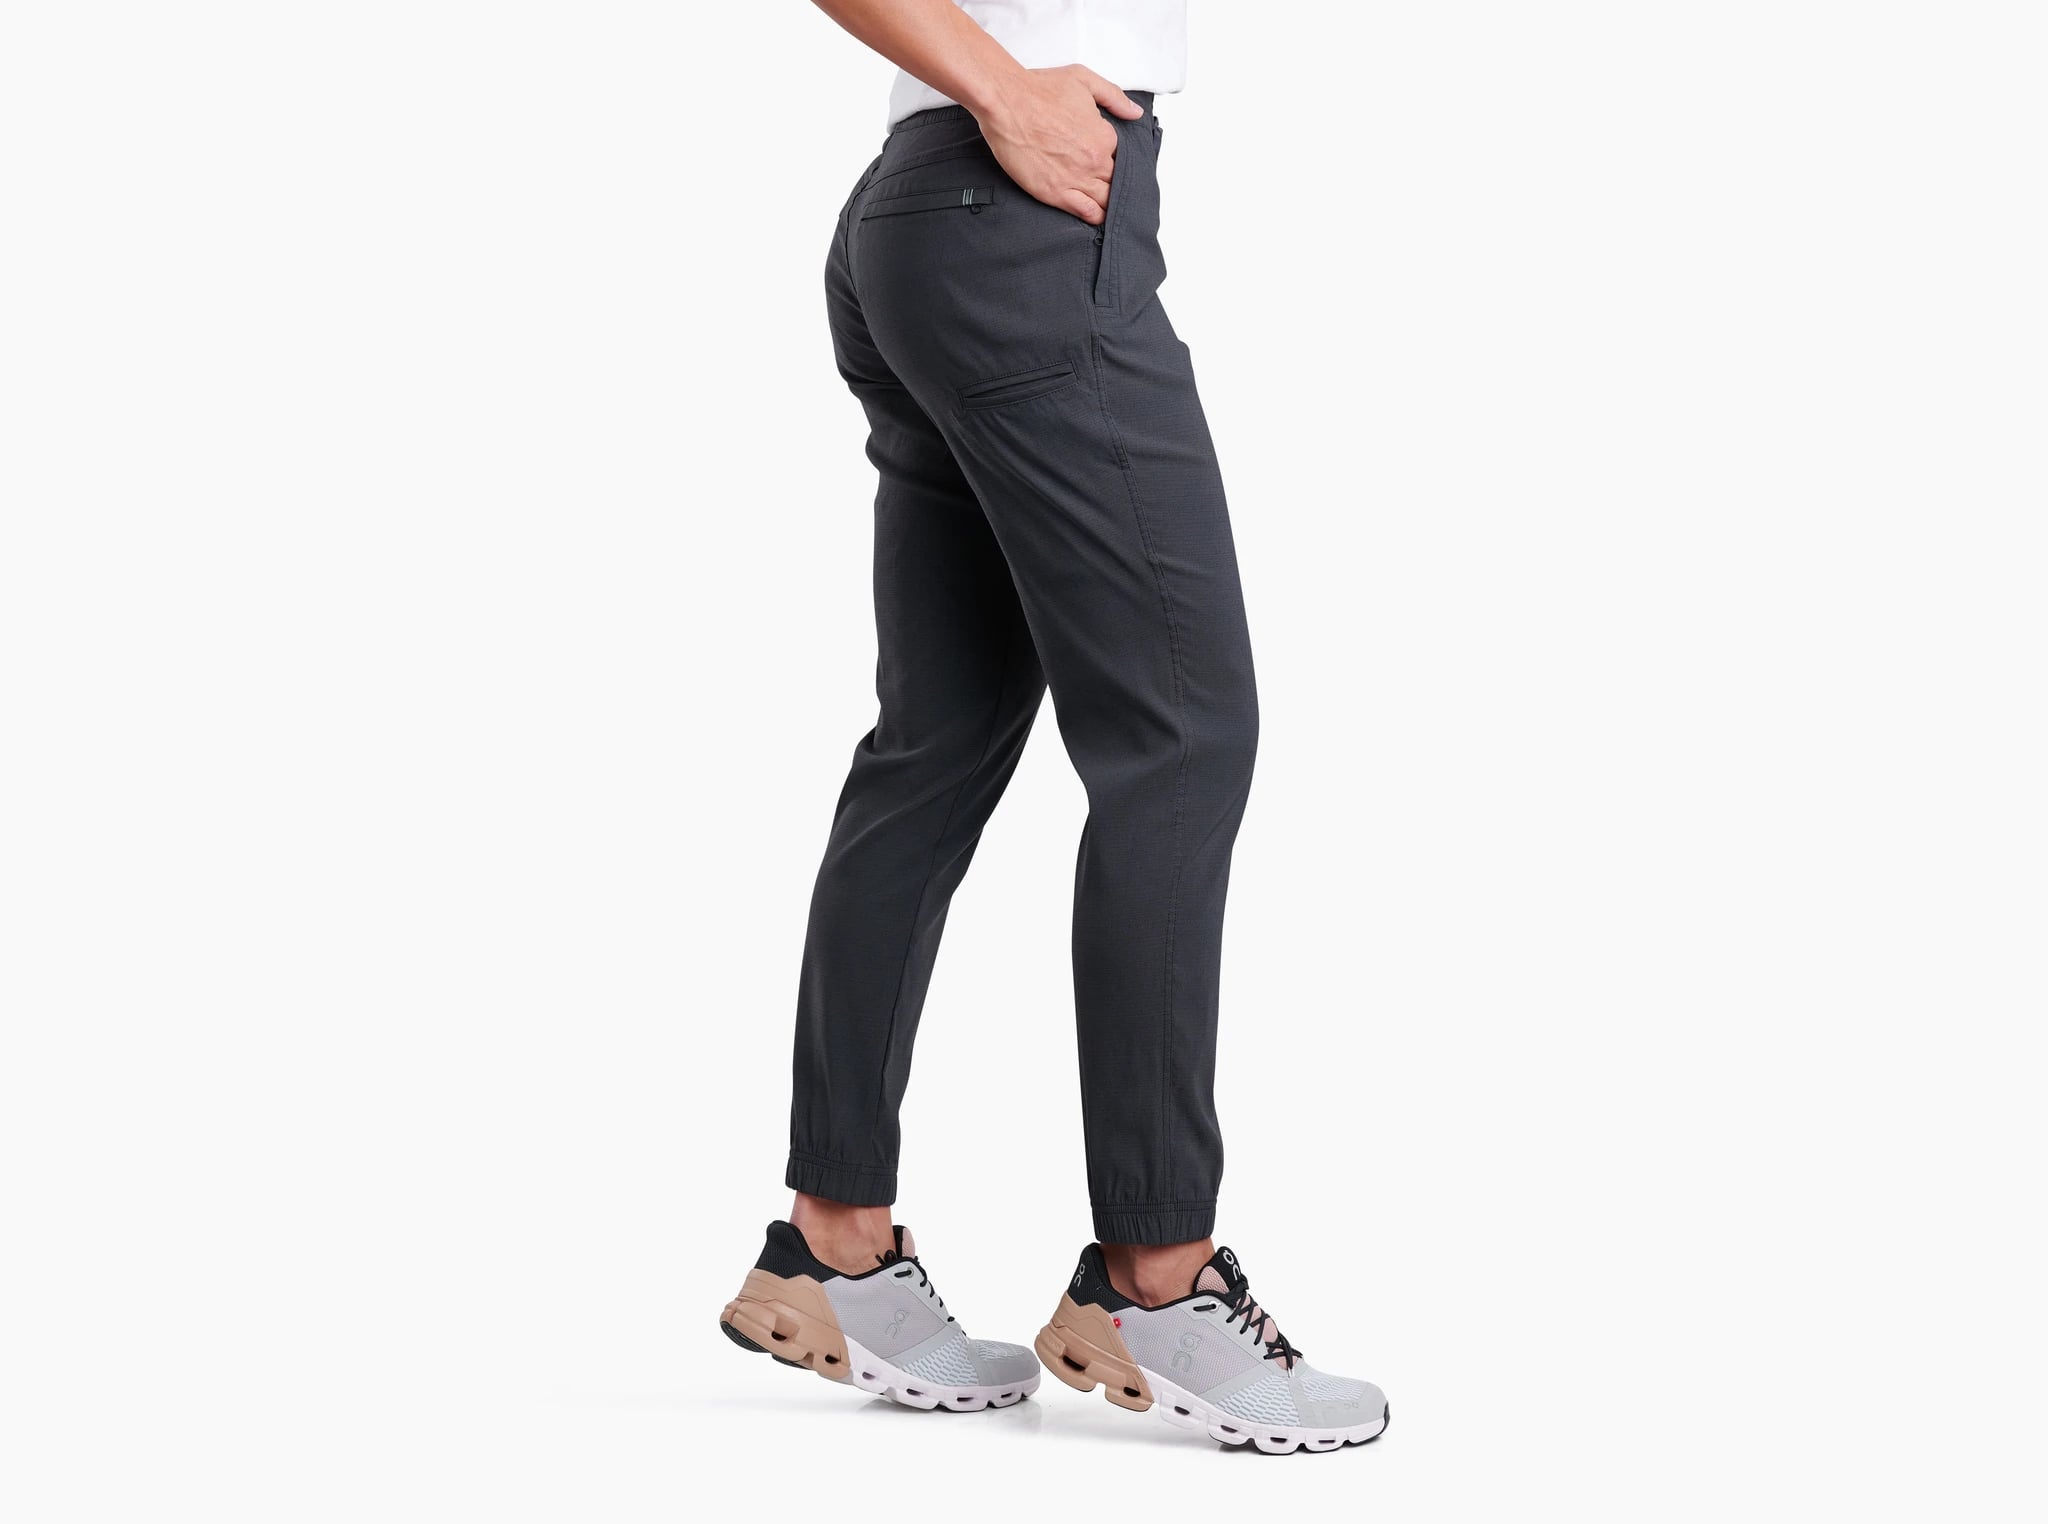 <p><a href="http://www.kuhl.com/kuhl/womens/pants/haven-joggr/?color=Black">BUY NOW</a></p><p>$109</p><p><a href="http://www.kuhl.com/kuhl/womens/pants/haven-joggr/?color=Black" class="ga-track"><strong>KÜHL Haven Jogger</strong></a> ($109)</p> <p>Whether you're strolling around the cruise ship or out on an ATV adventure, you'll stay well protected with comfortable joggers that have high abrasion resistance and are tough, with ripstop performance.</p>